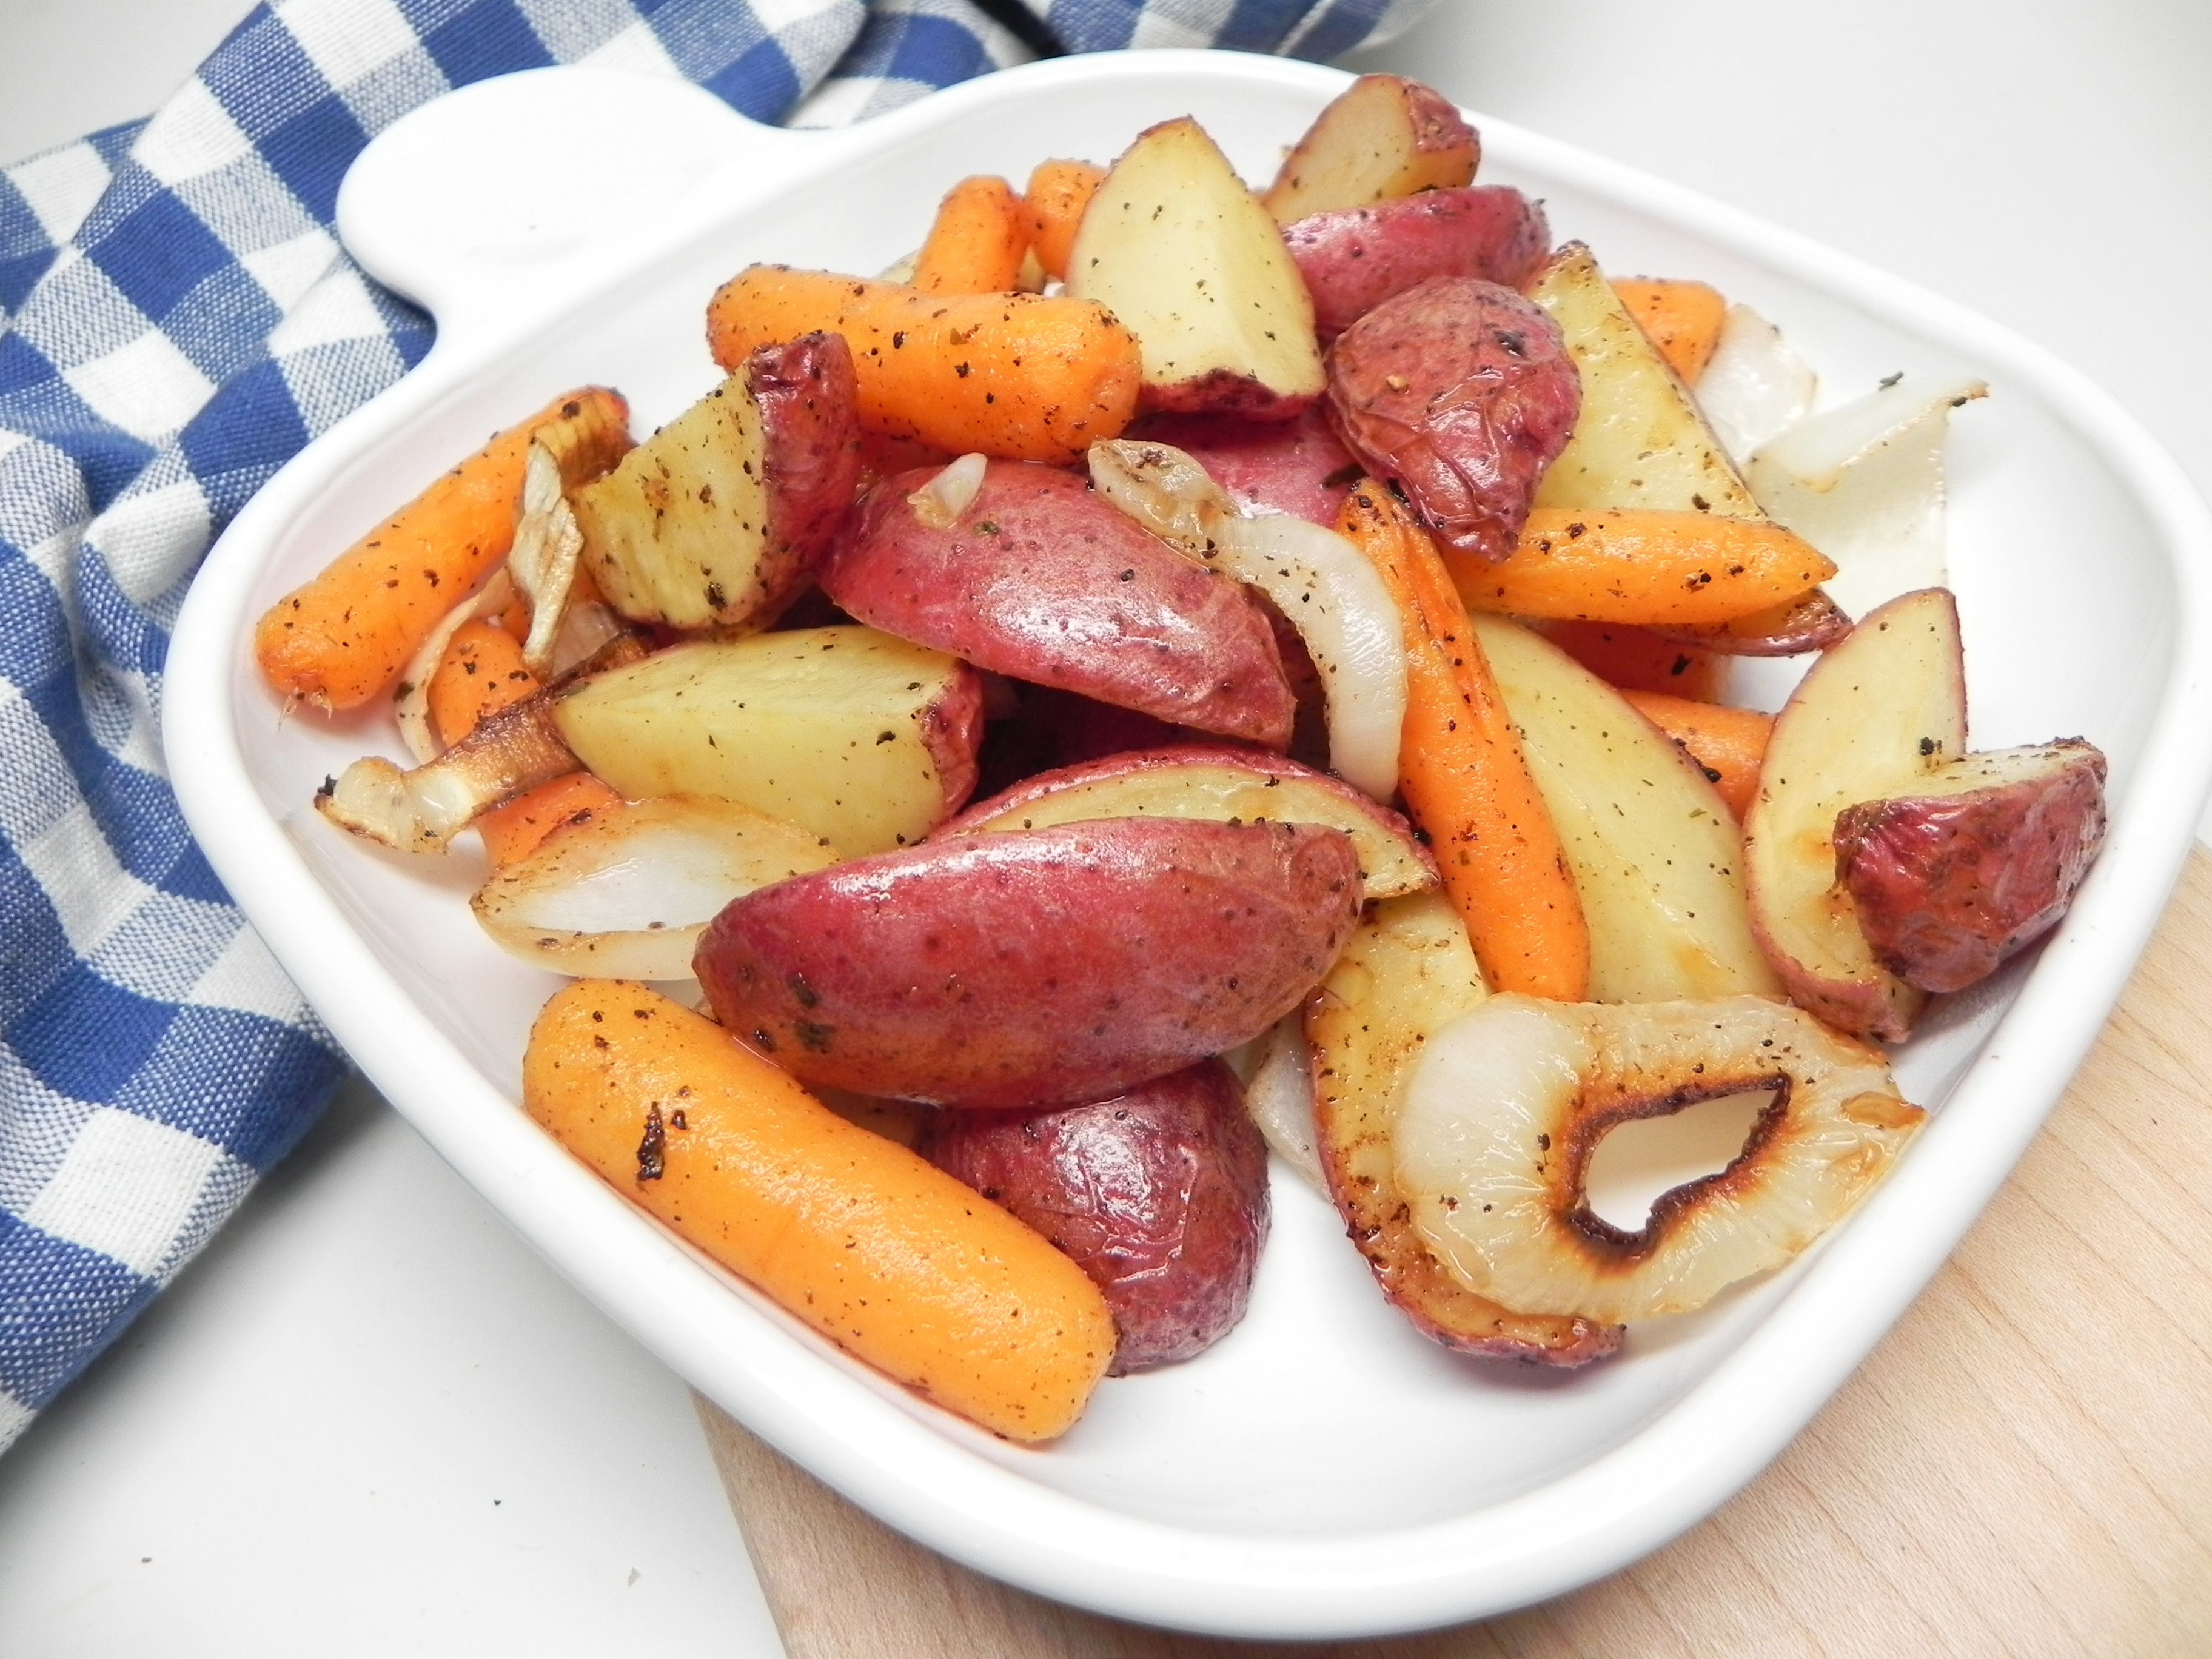 Roasted Potatoes and Carrots with Ranch Seasoning